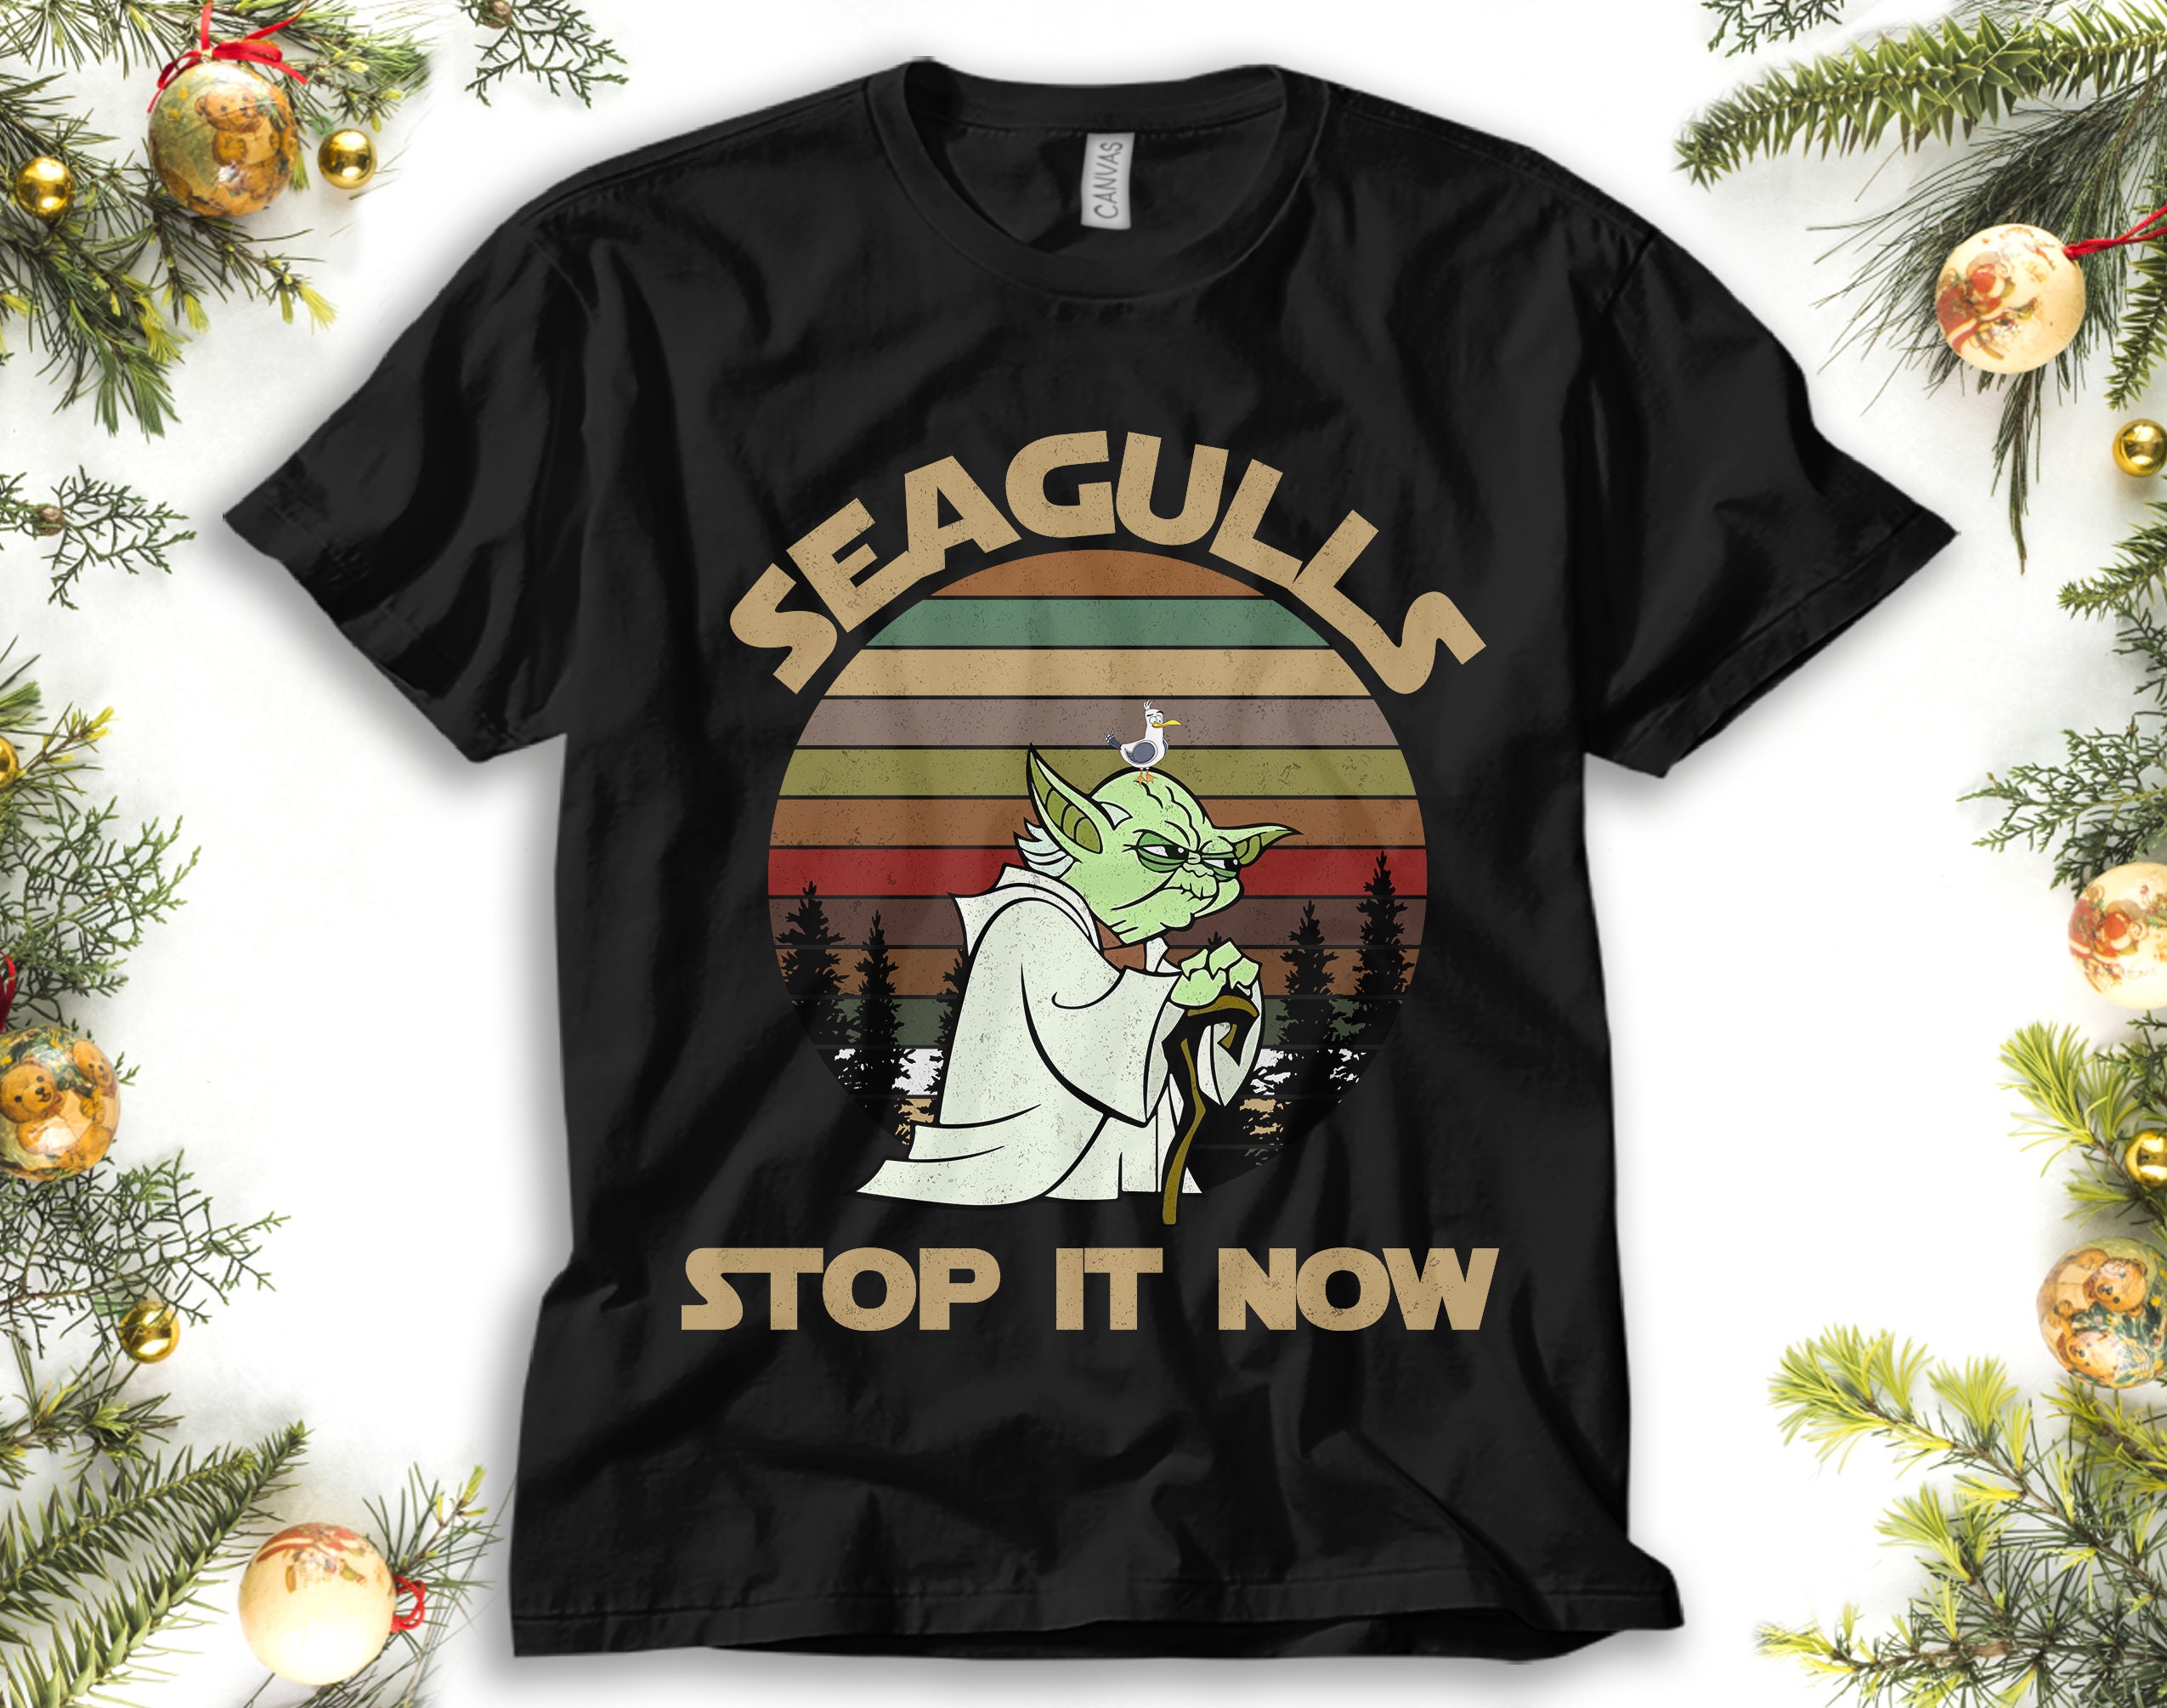 Discover Star Wars Seagulls Stop It Now Yoda Retro Vintage Christmas Shirt